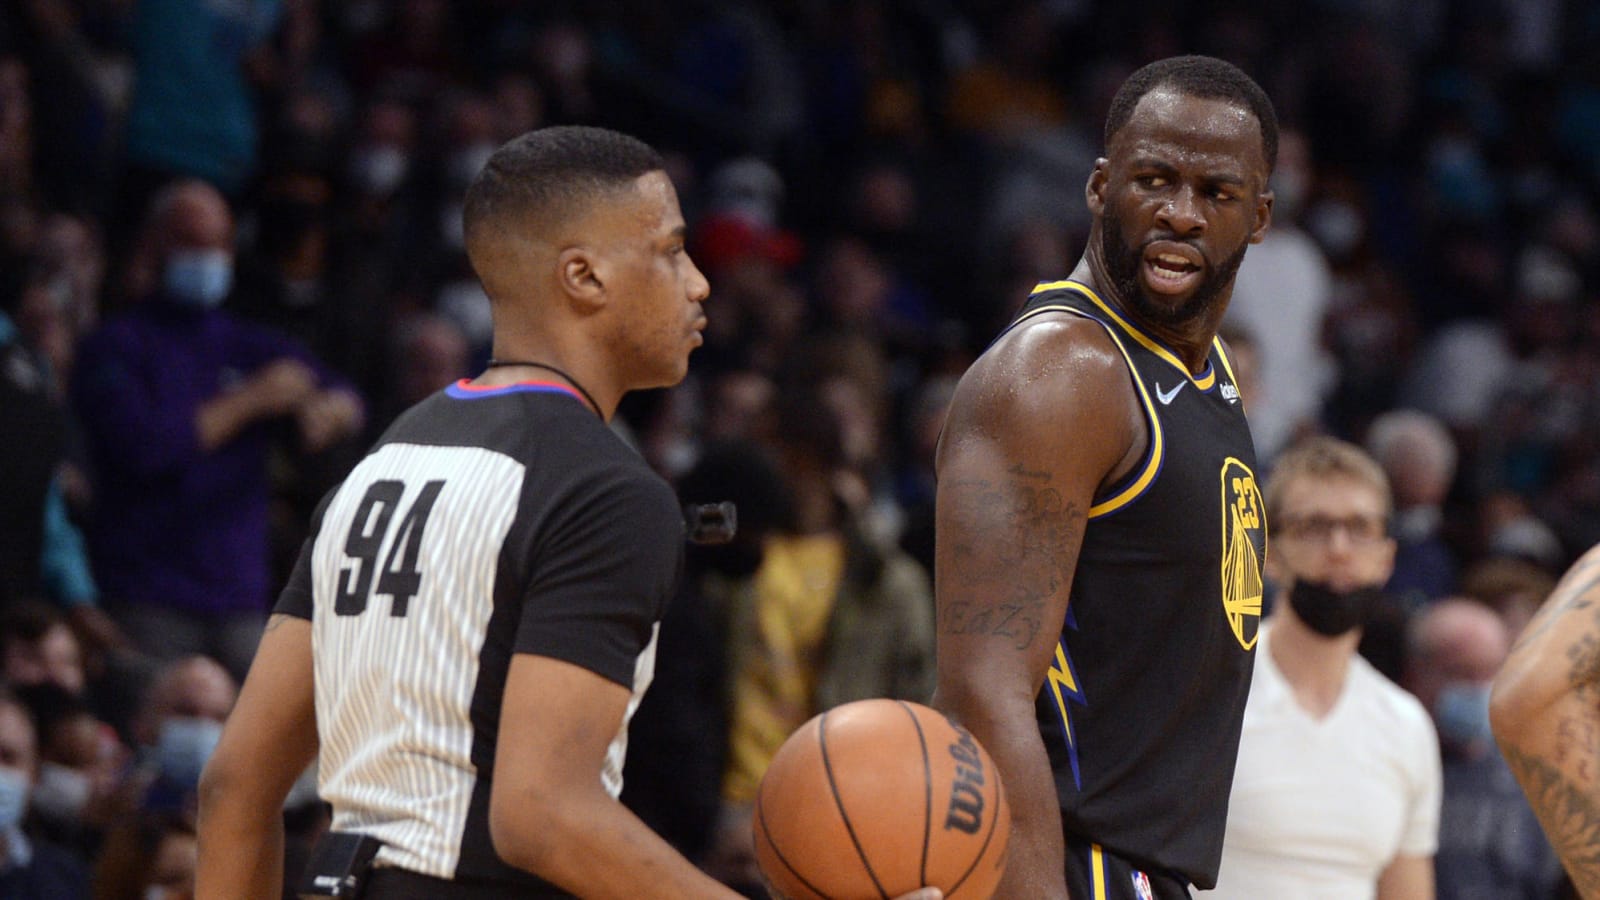 Draymond Green explains what went wrong on stunning play vs. Hornets